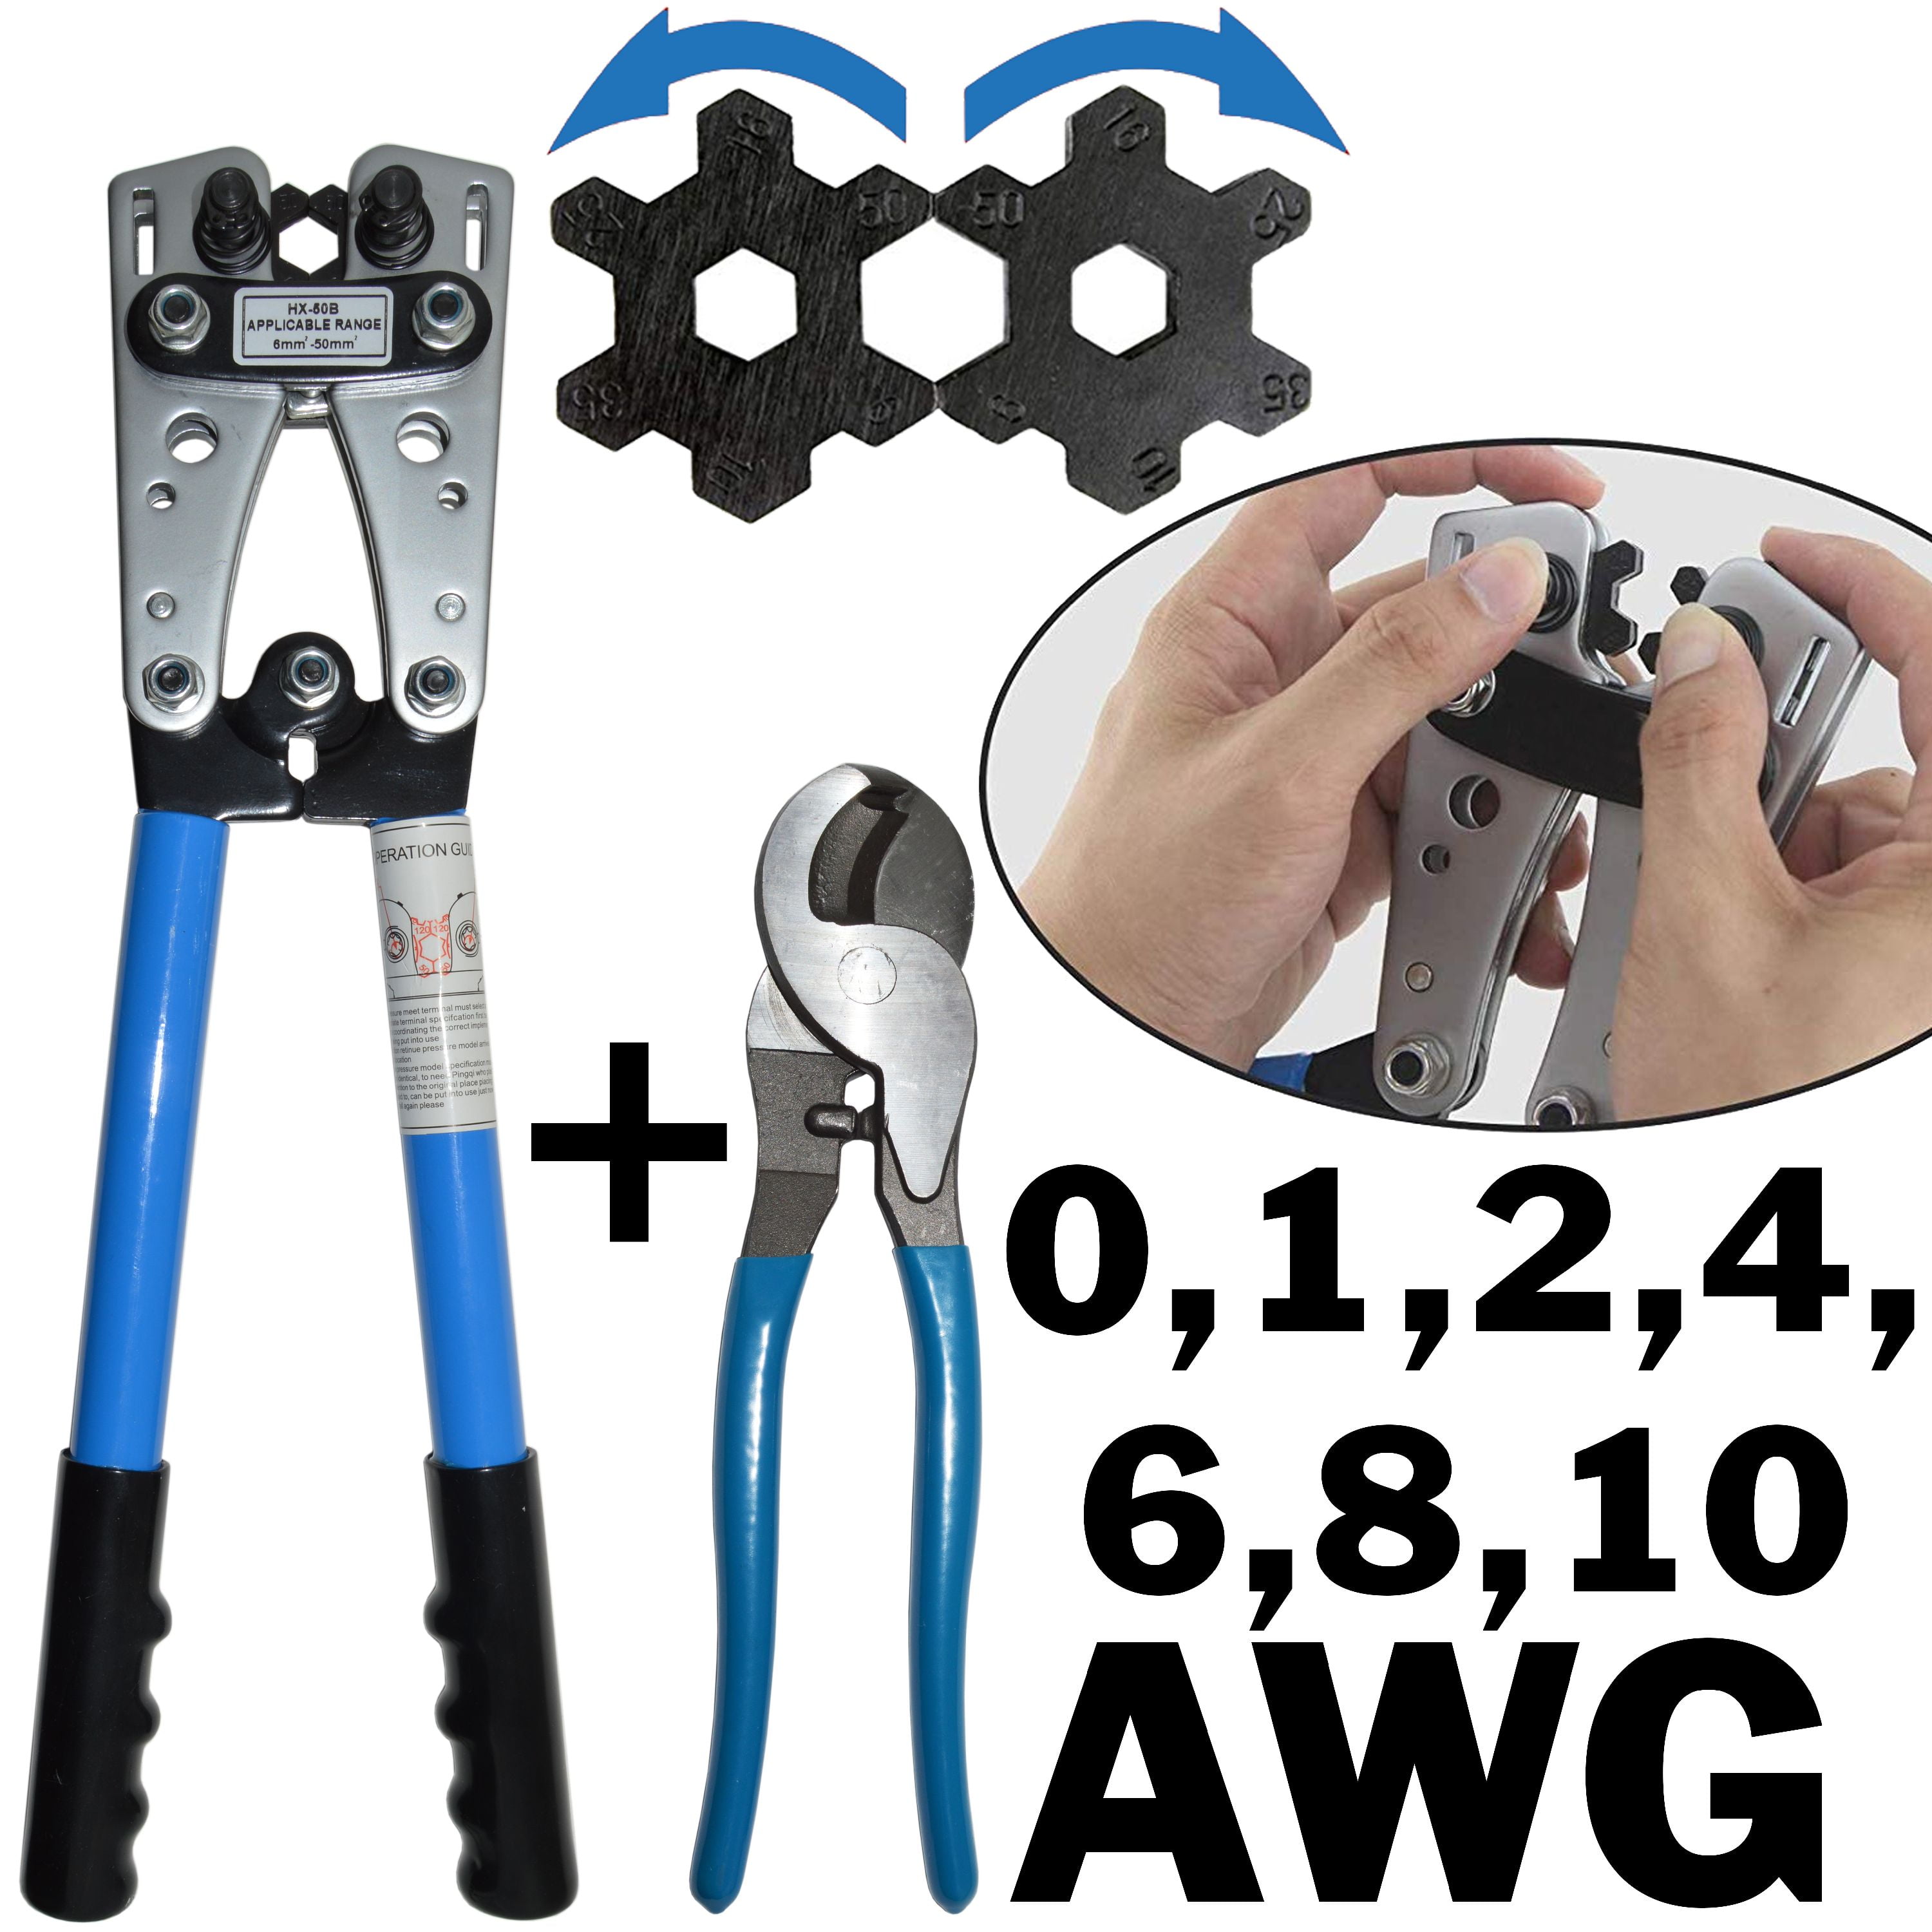 8” Crimping Pliers CRIMPER PLIER TOOL CABLE WIre Strippers Cutter 